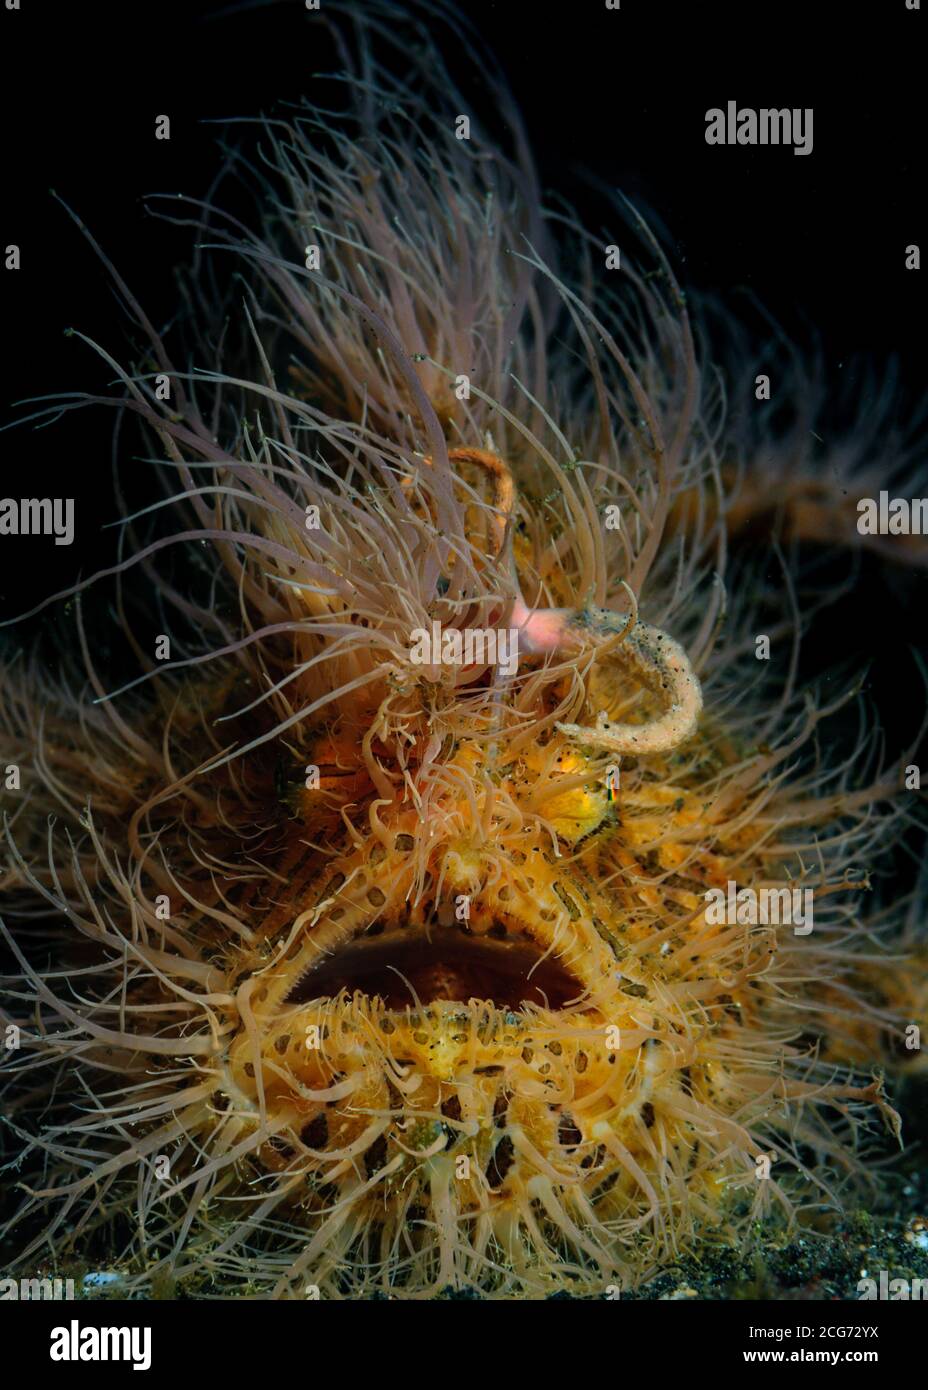 Portrait of a Hairy Frogfish, Lembeh Strait, Indonesia Stock Photo